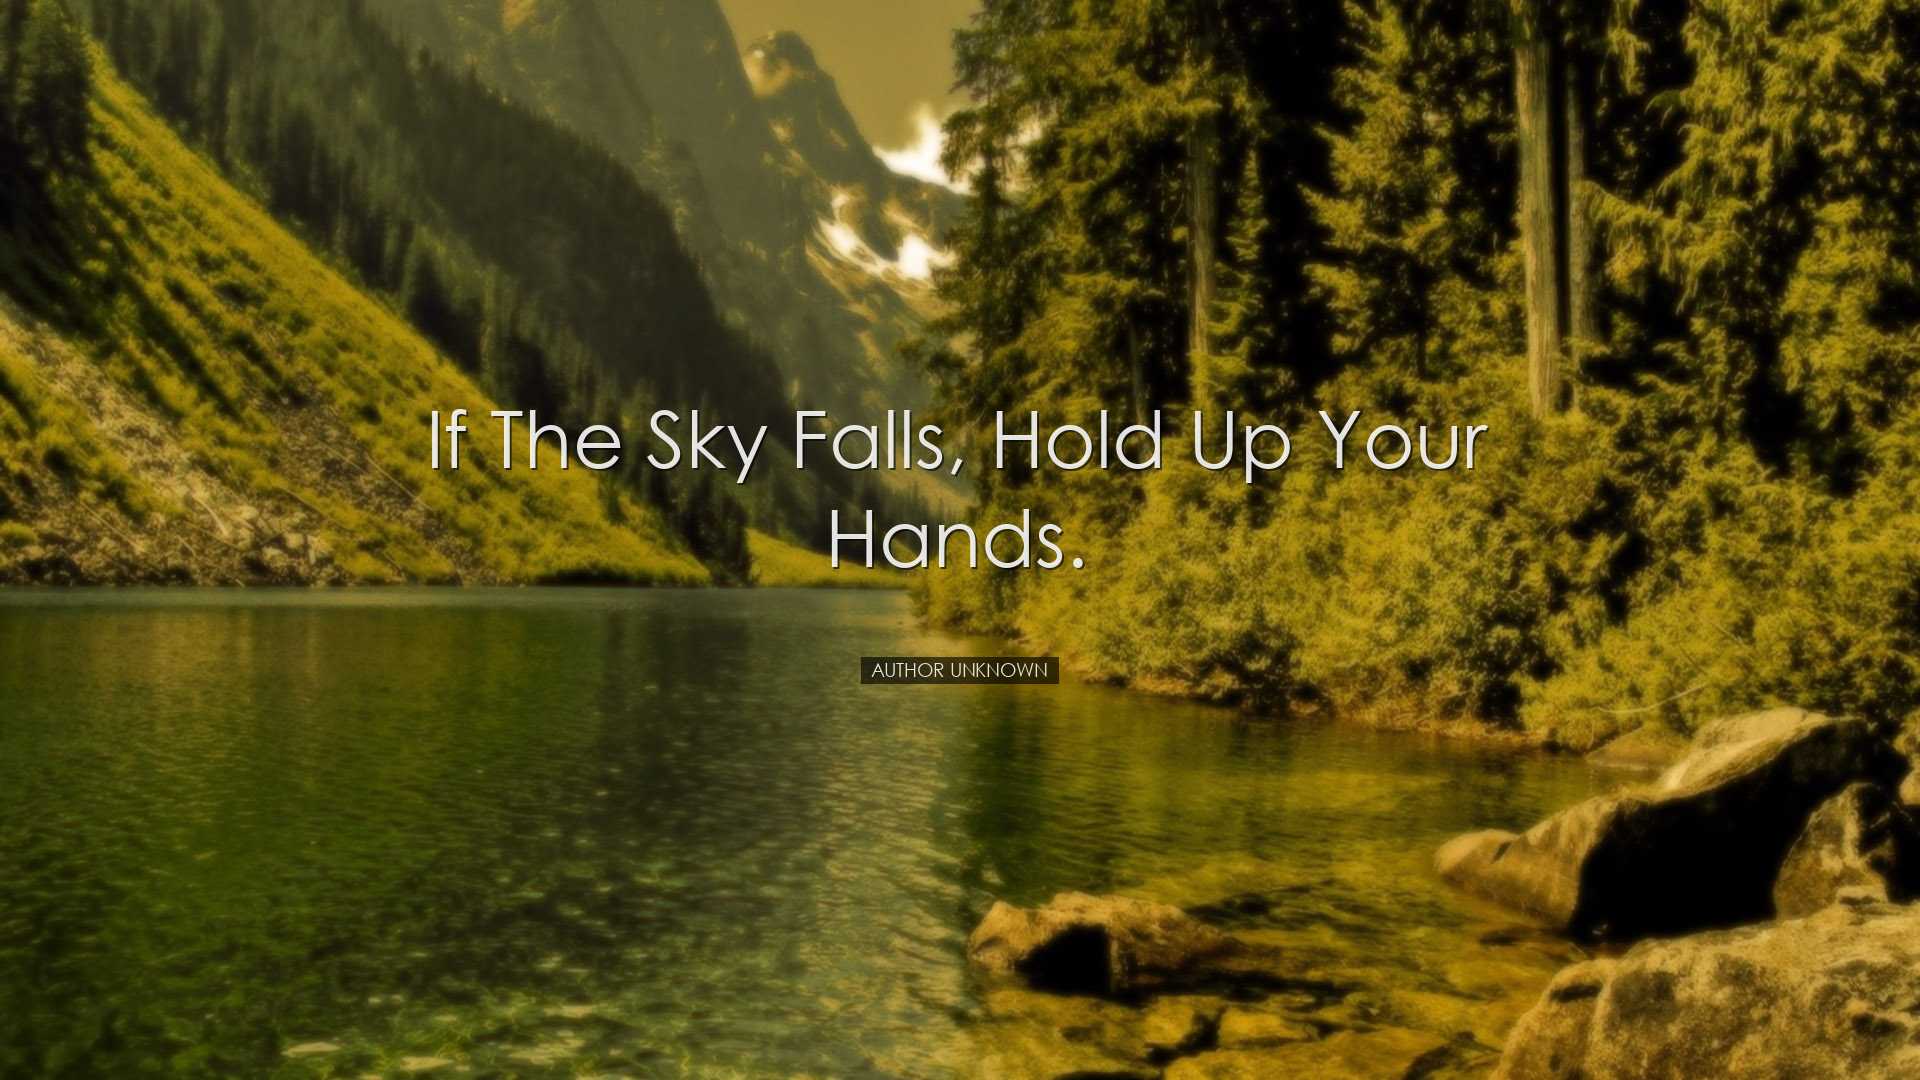 If the sky falls, hold up your hands. - Author Unknown